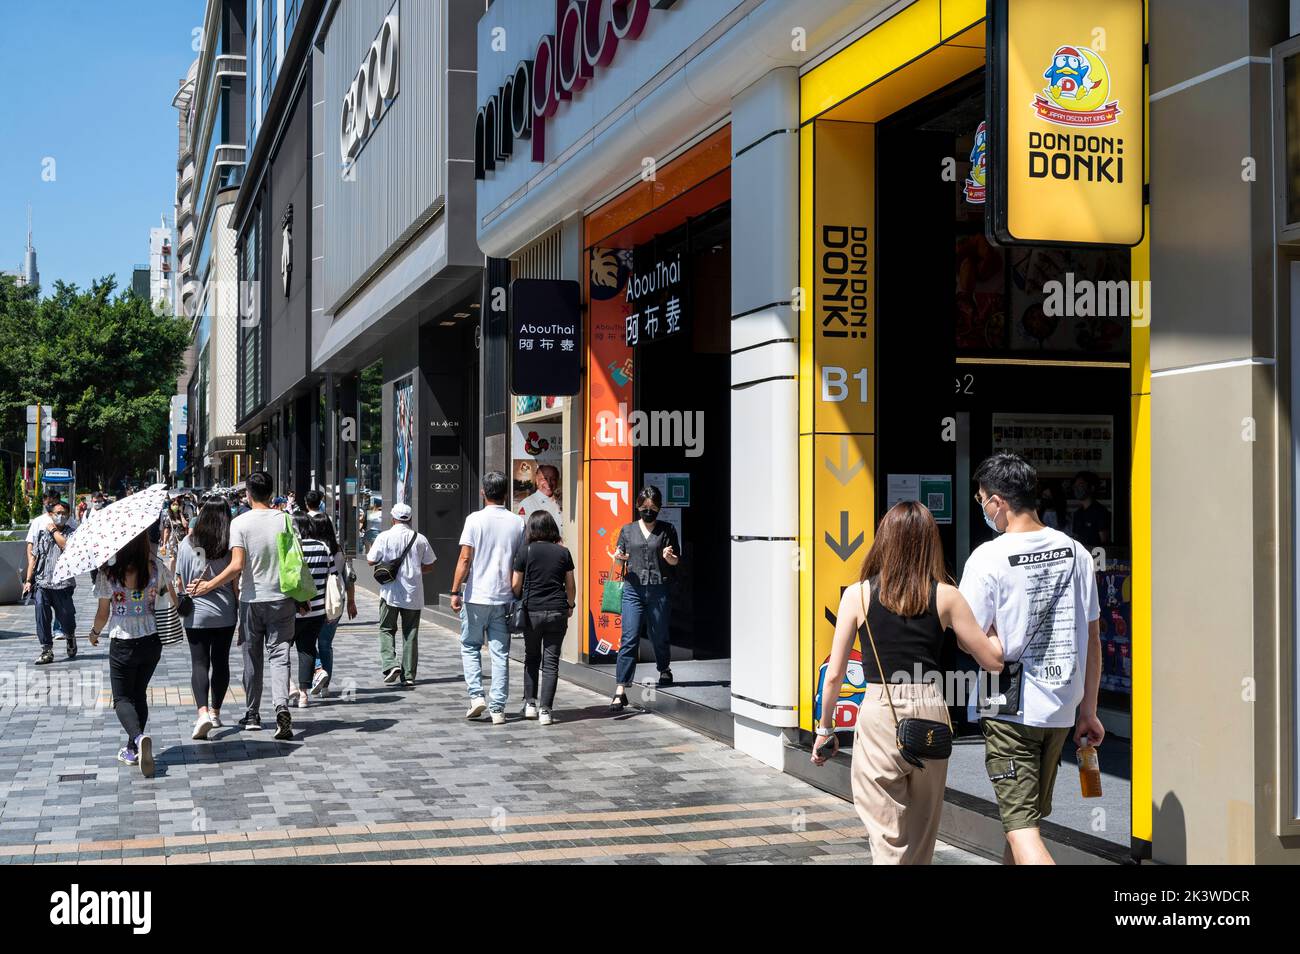 Pedestrians walk past Japan's largest chain stores company Don Quijote, commonly known as Donki, store in Hong Kong Stock Photo